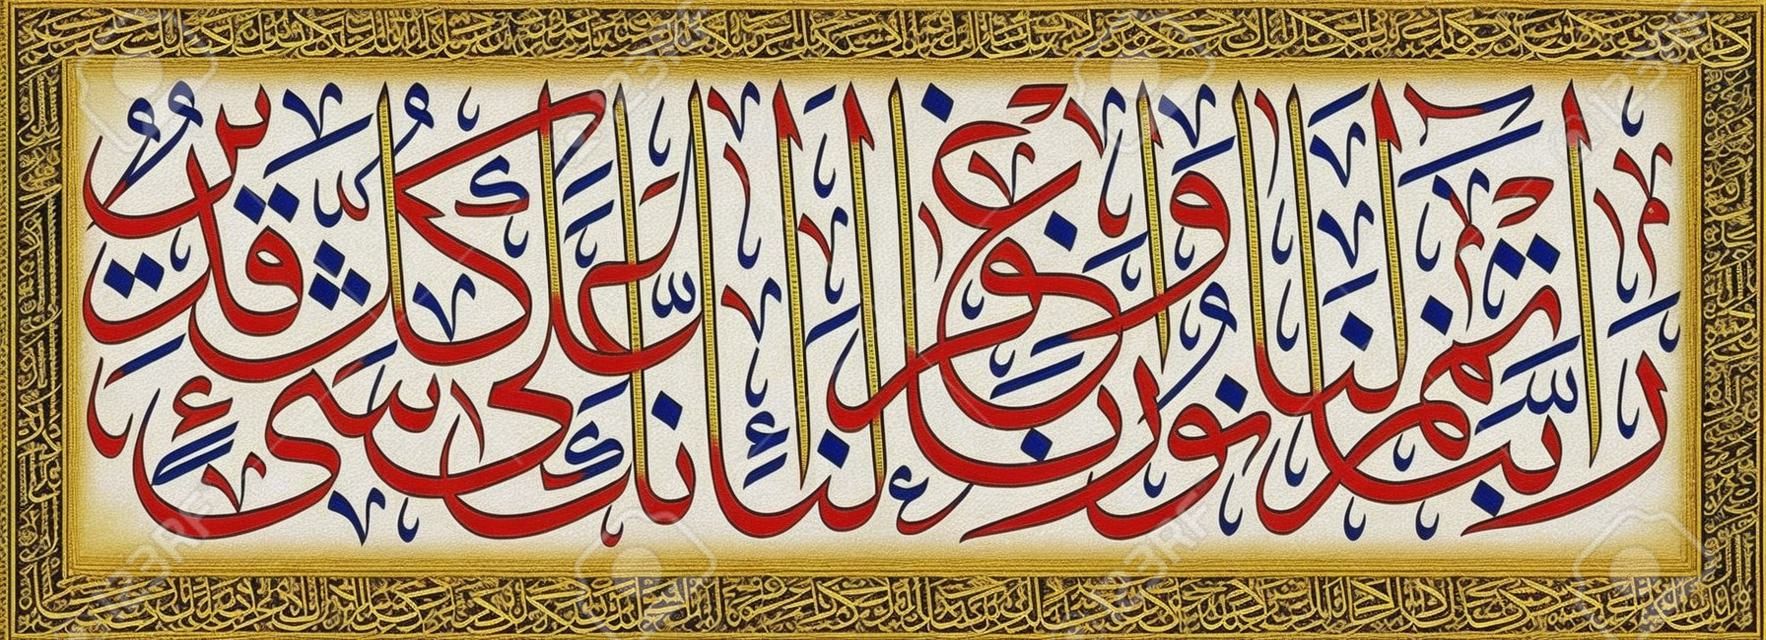 Islamic calligraphy from the Quran, Surah 66 verse 8. -Our Lord Give us full light and forgive us. Indeed, You are capable of anything."